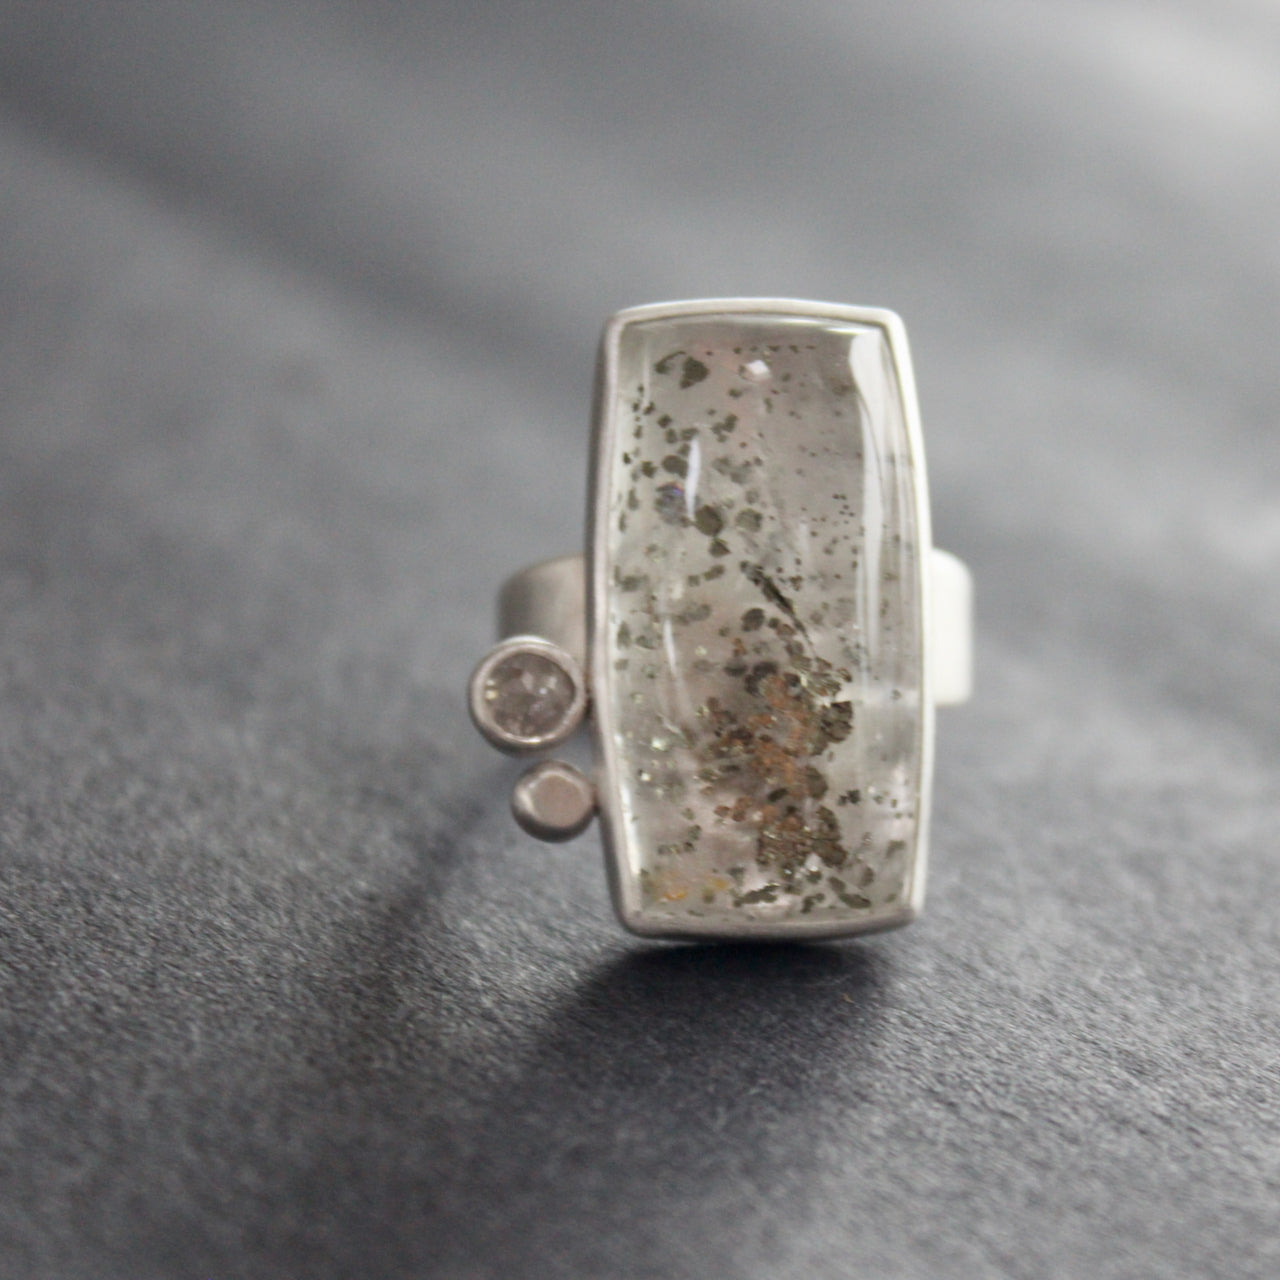 Silver ring featuring large rectangular quartz stone with small diamond and small silver ball to the side